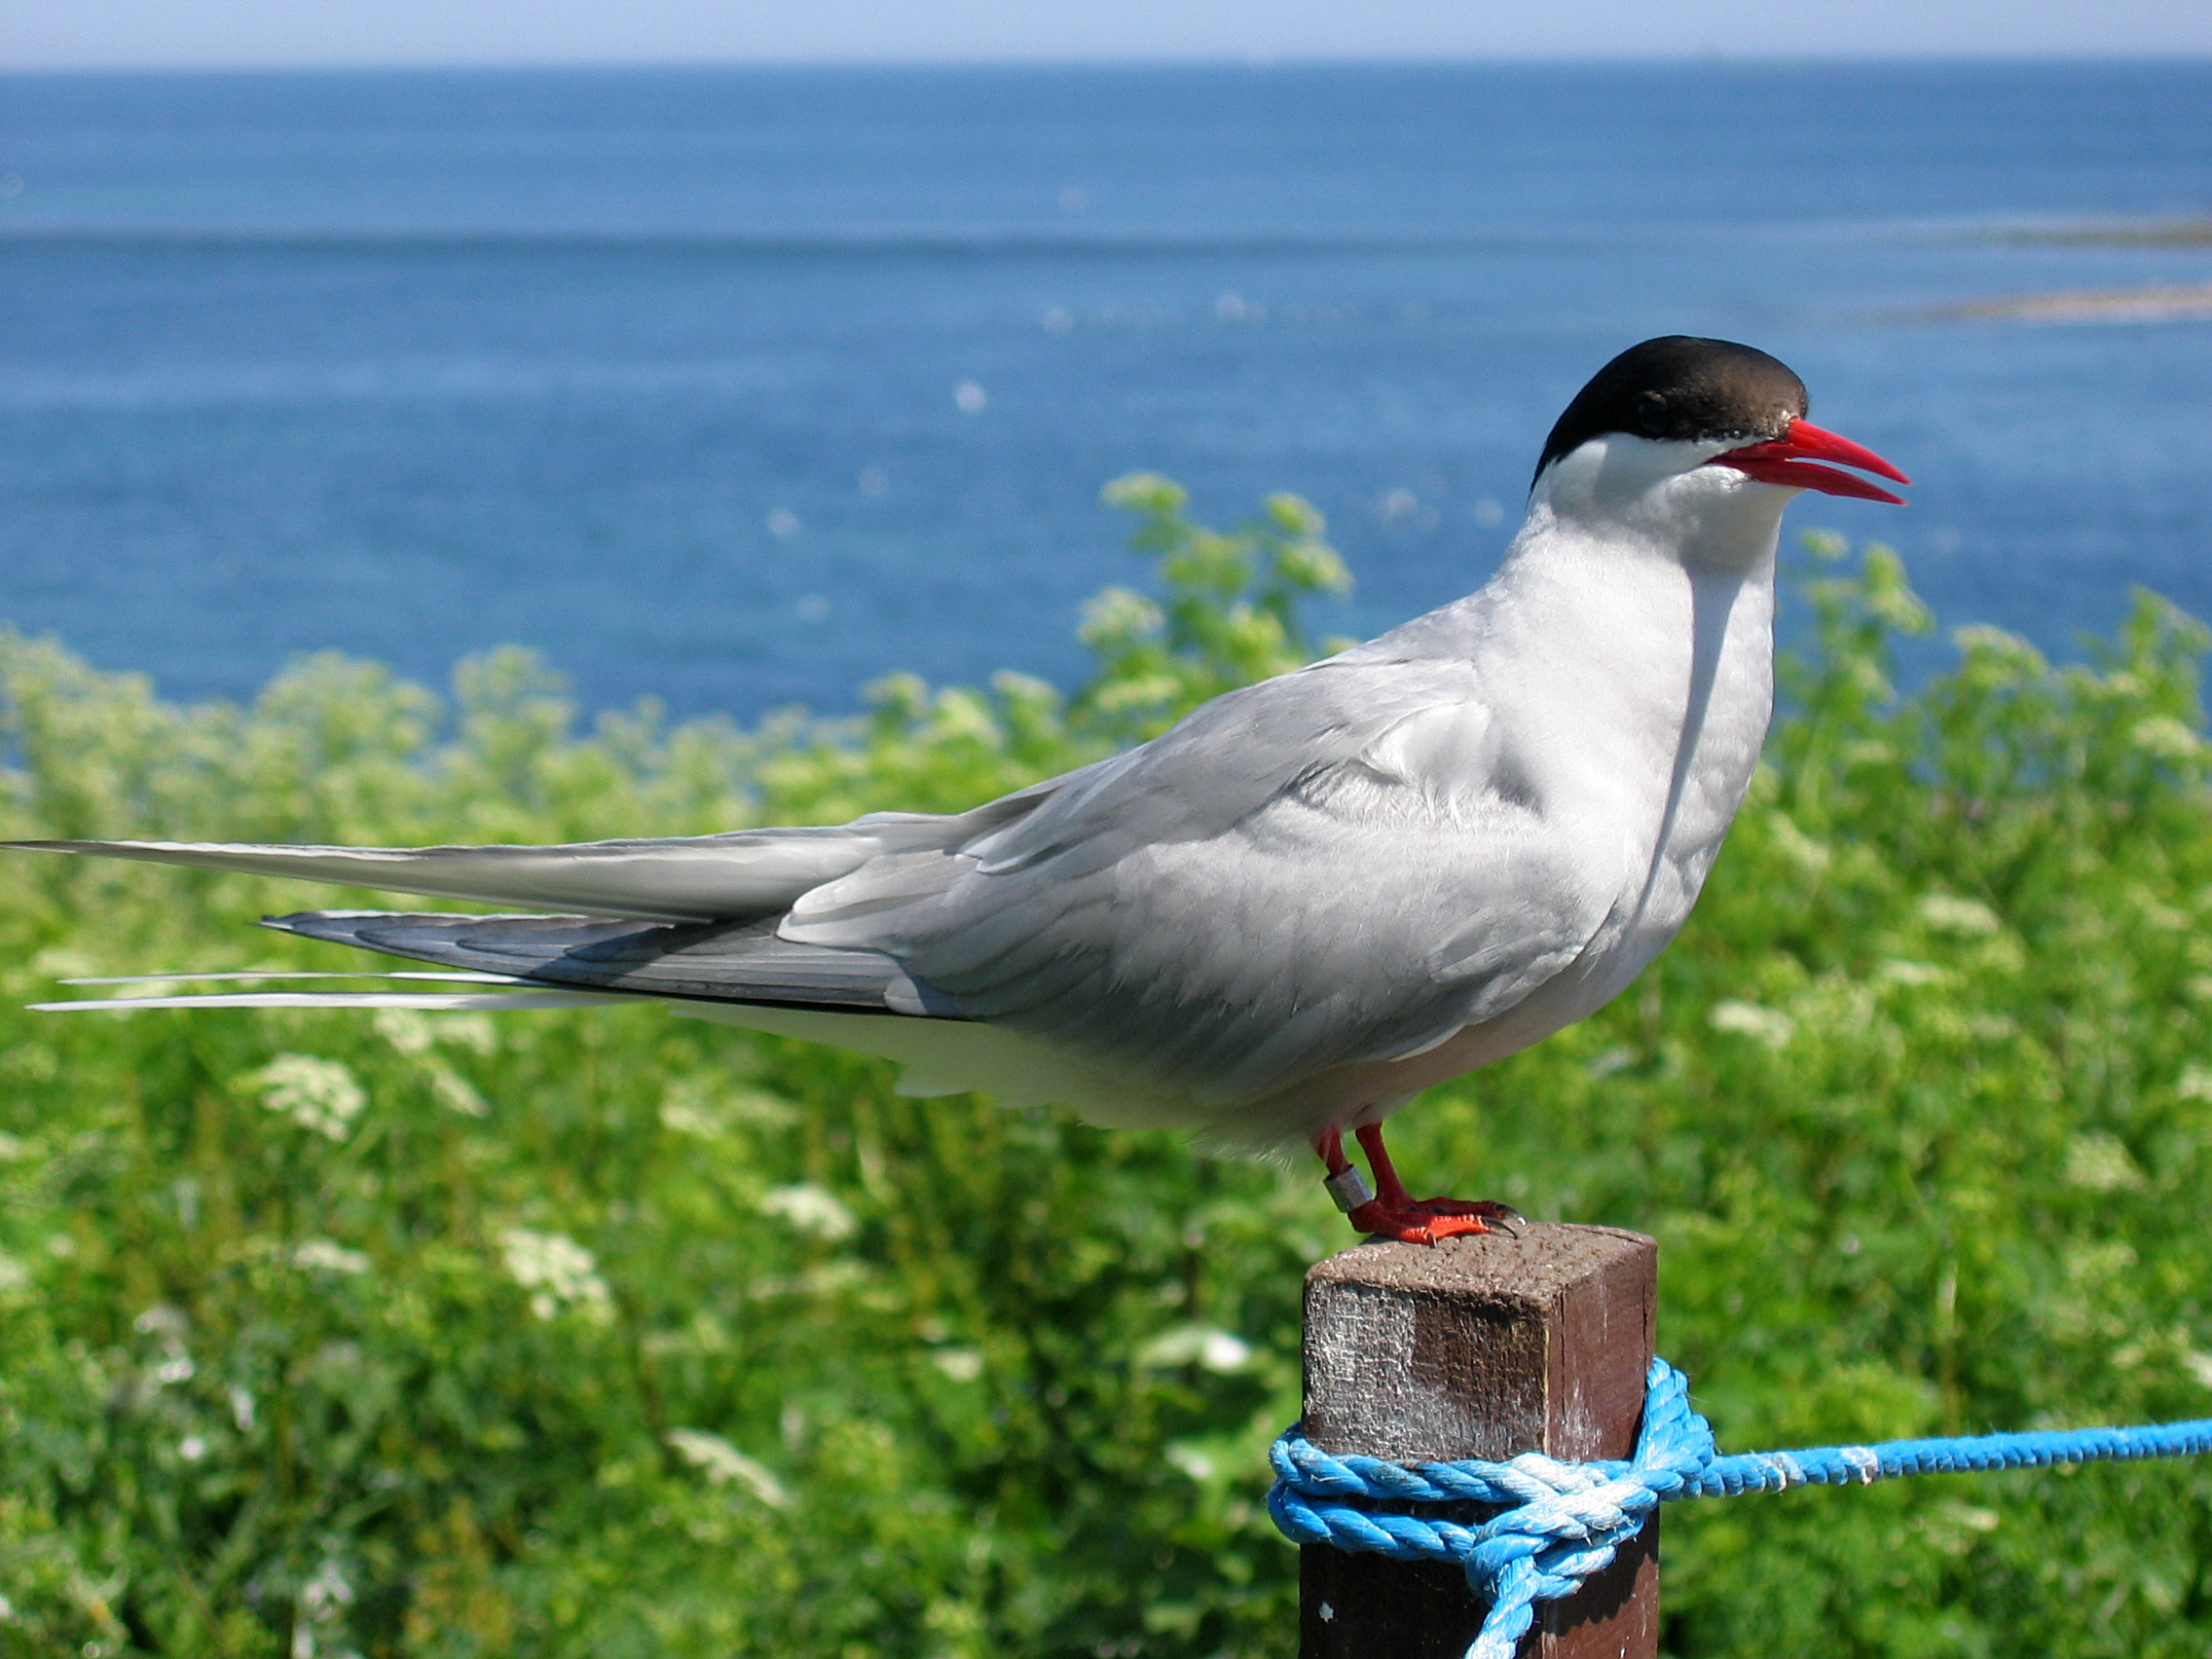 https://upload.wikimedia.org/wikipedia/commons/2/29/2009_07_02_-_Arctic_tern_on_Farne_Islands_-_The_blue_rope_demarcates_the_visitors%27_path.JPG